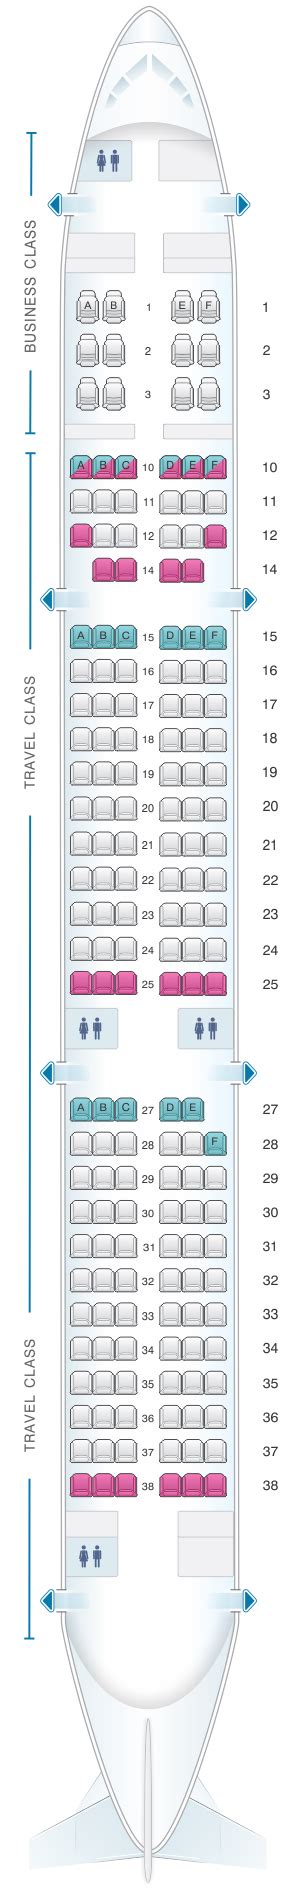 Learn About Imagen Asiana A Seat Map In Thptnganamst Edu Vn